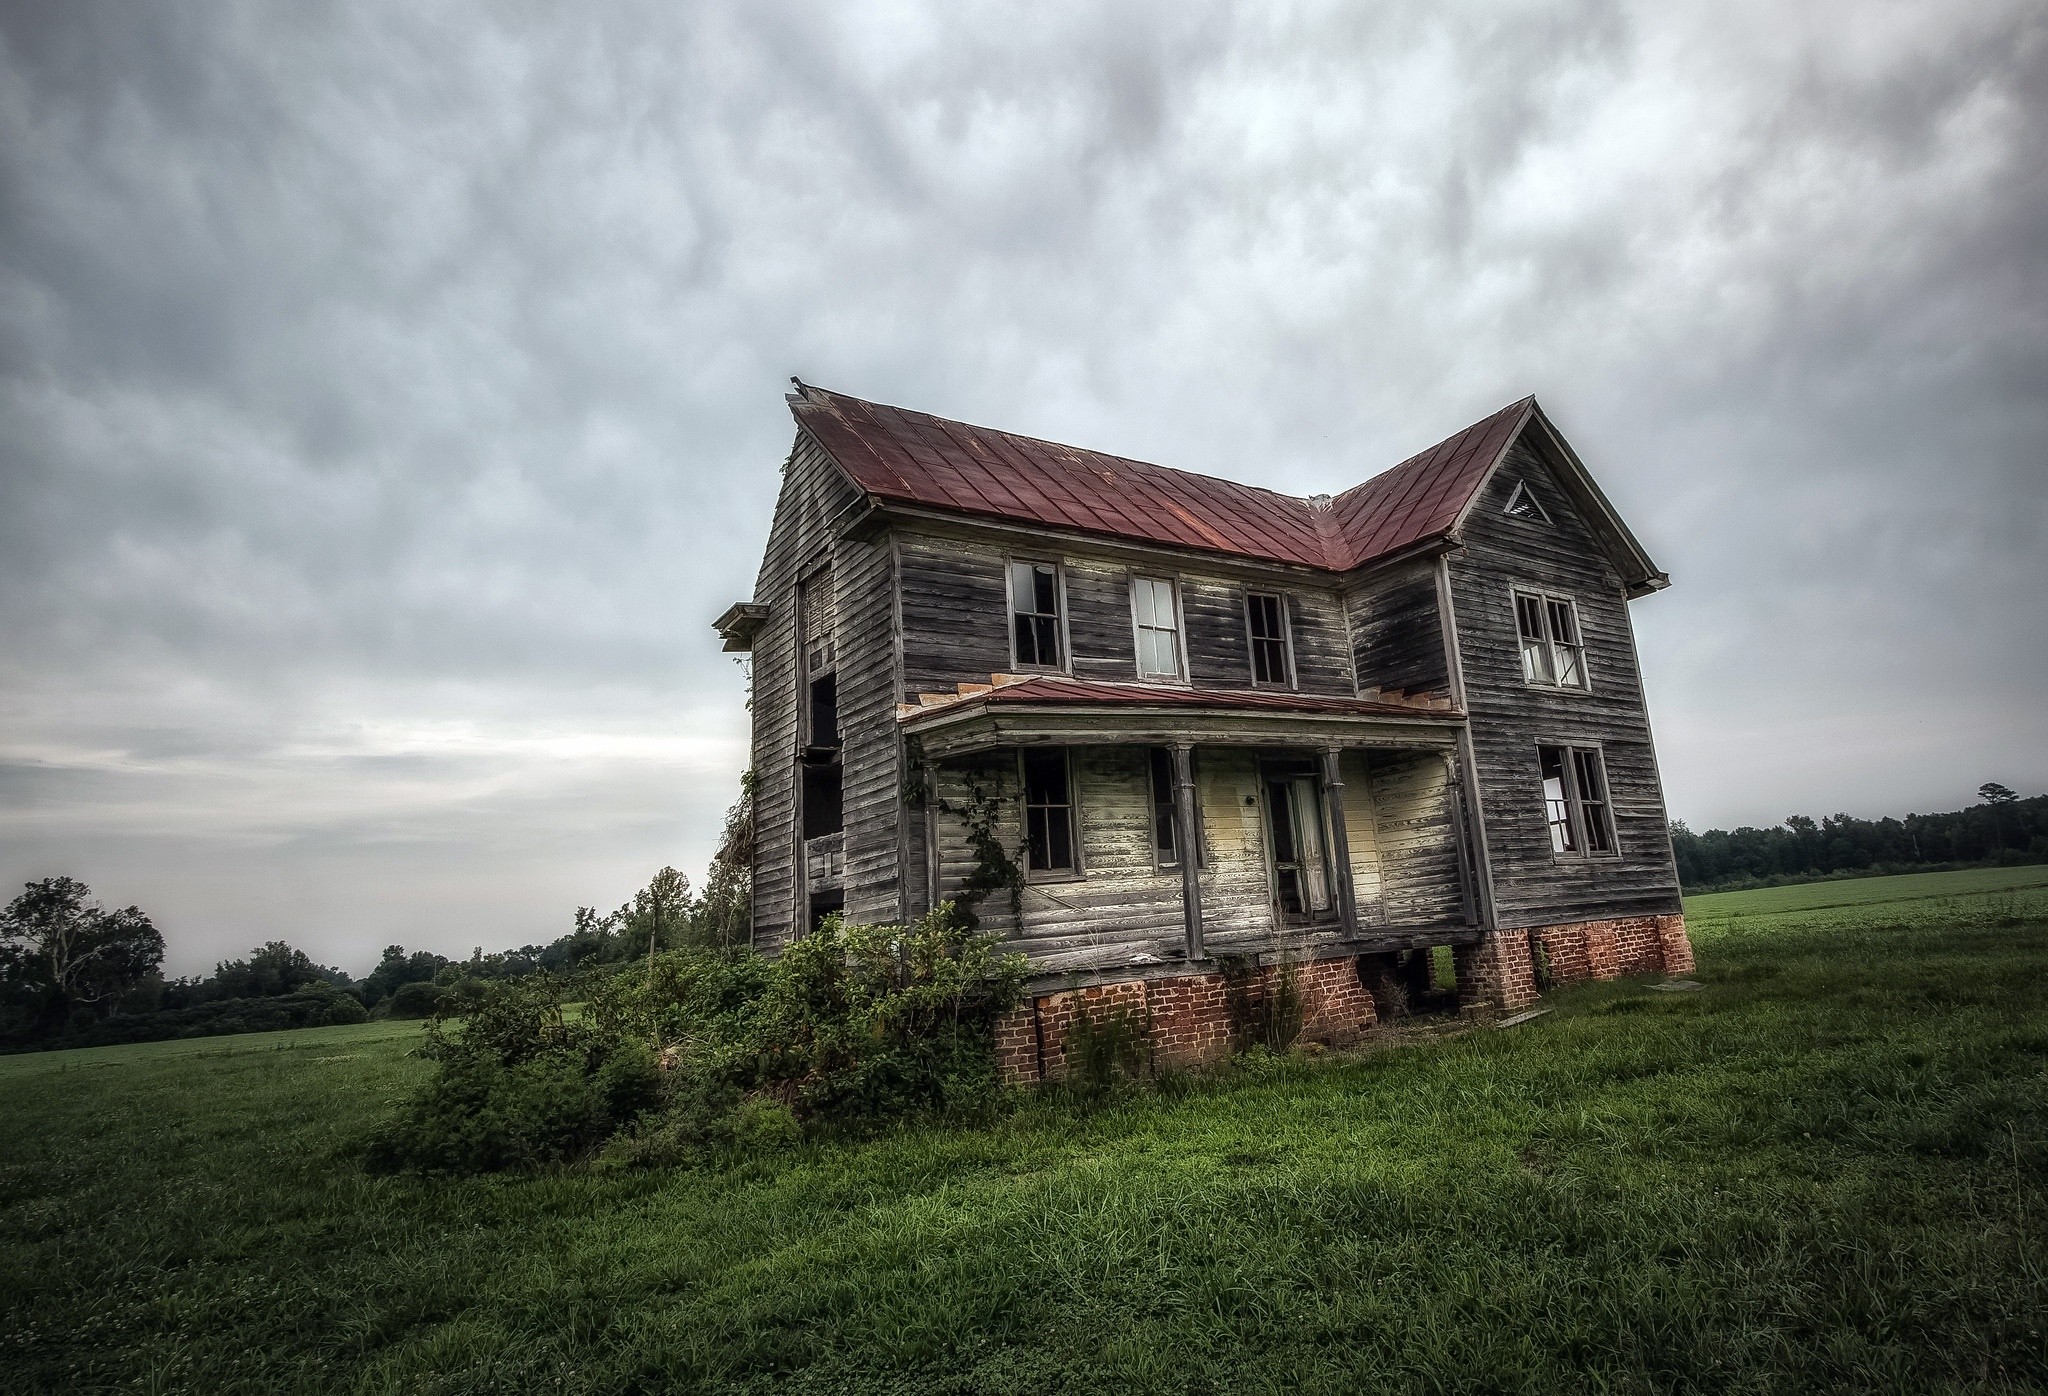 General 2048x1396 old house ruins abandoned overcast grass field